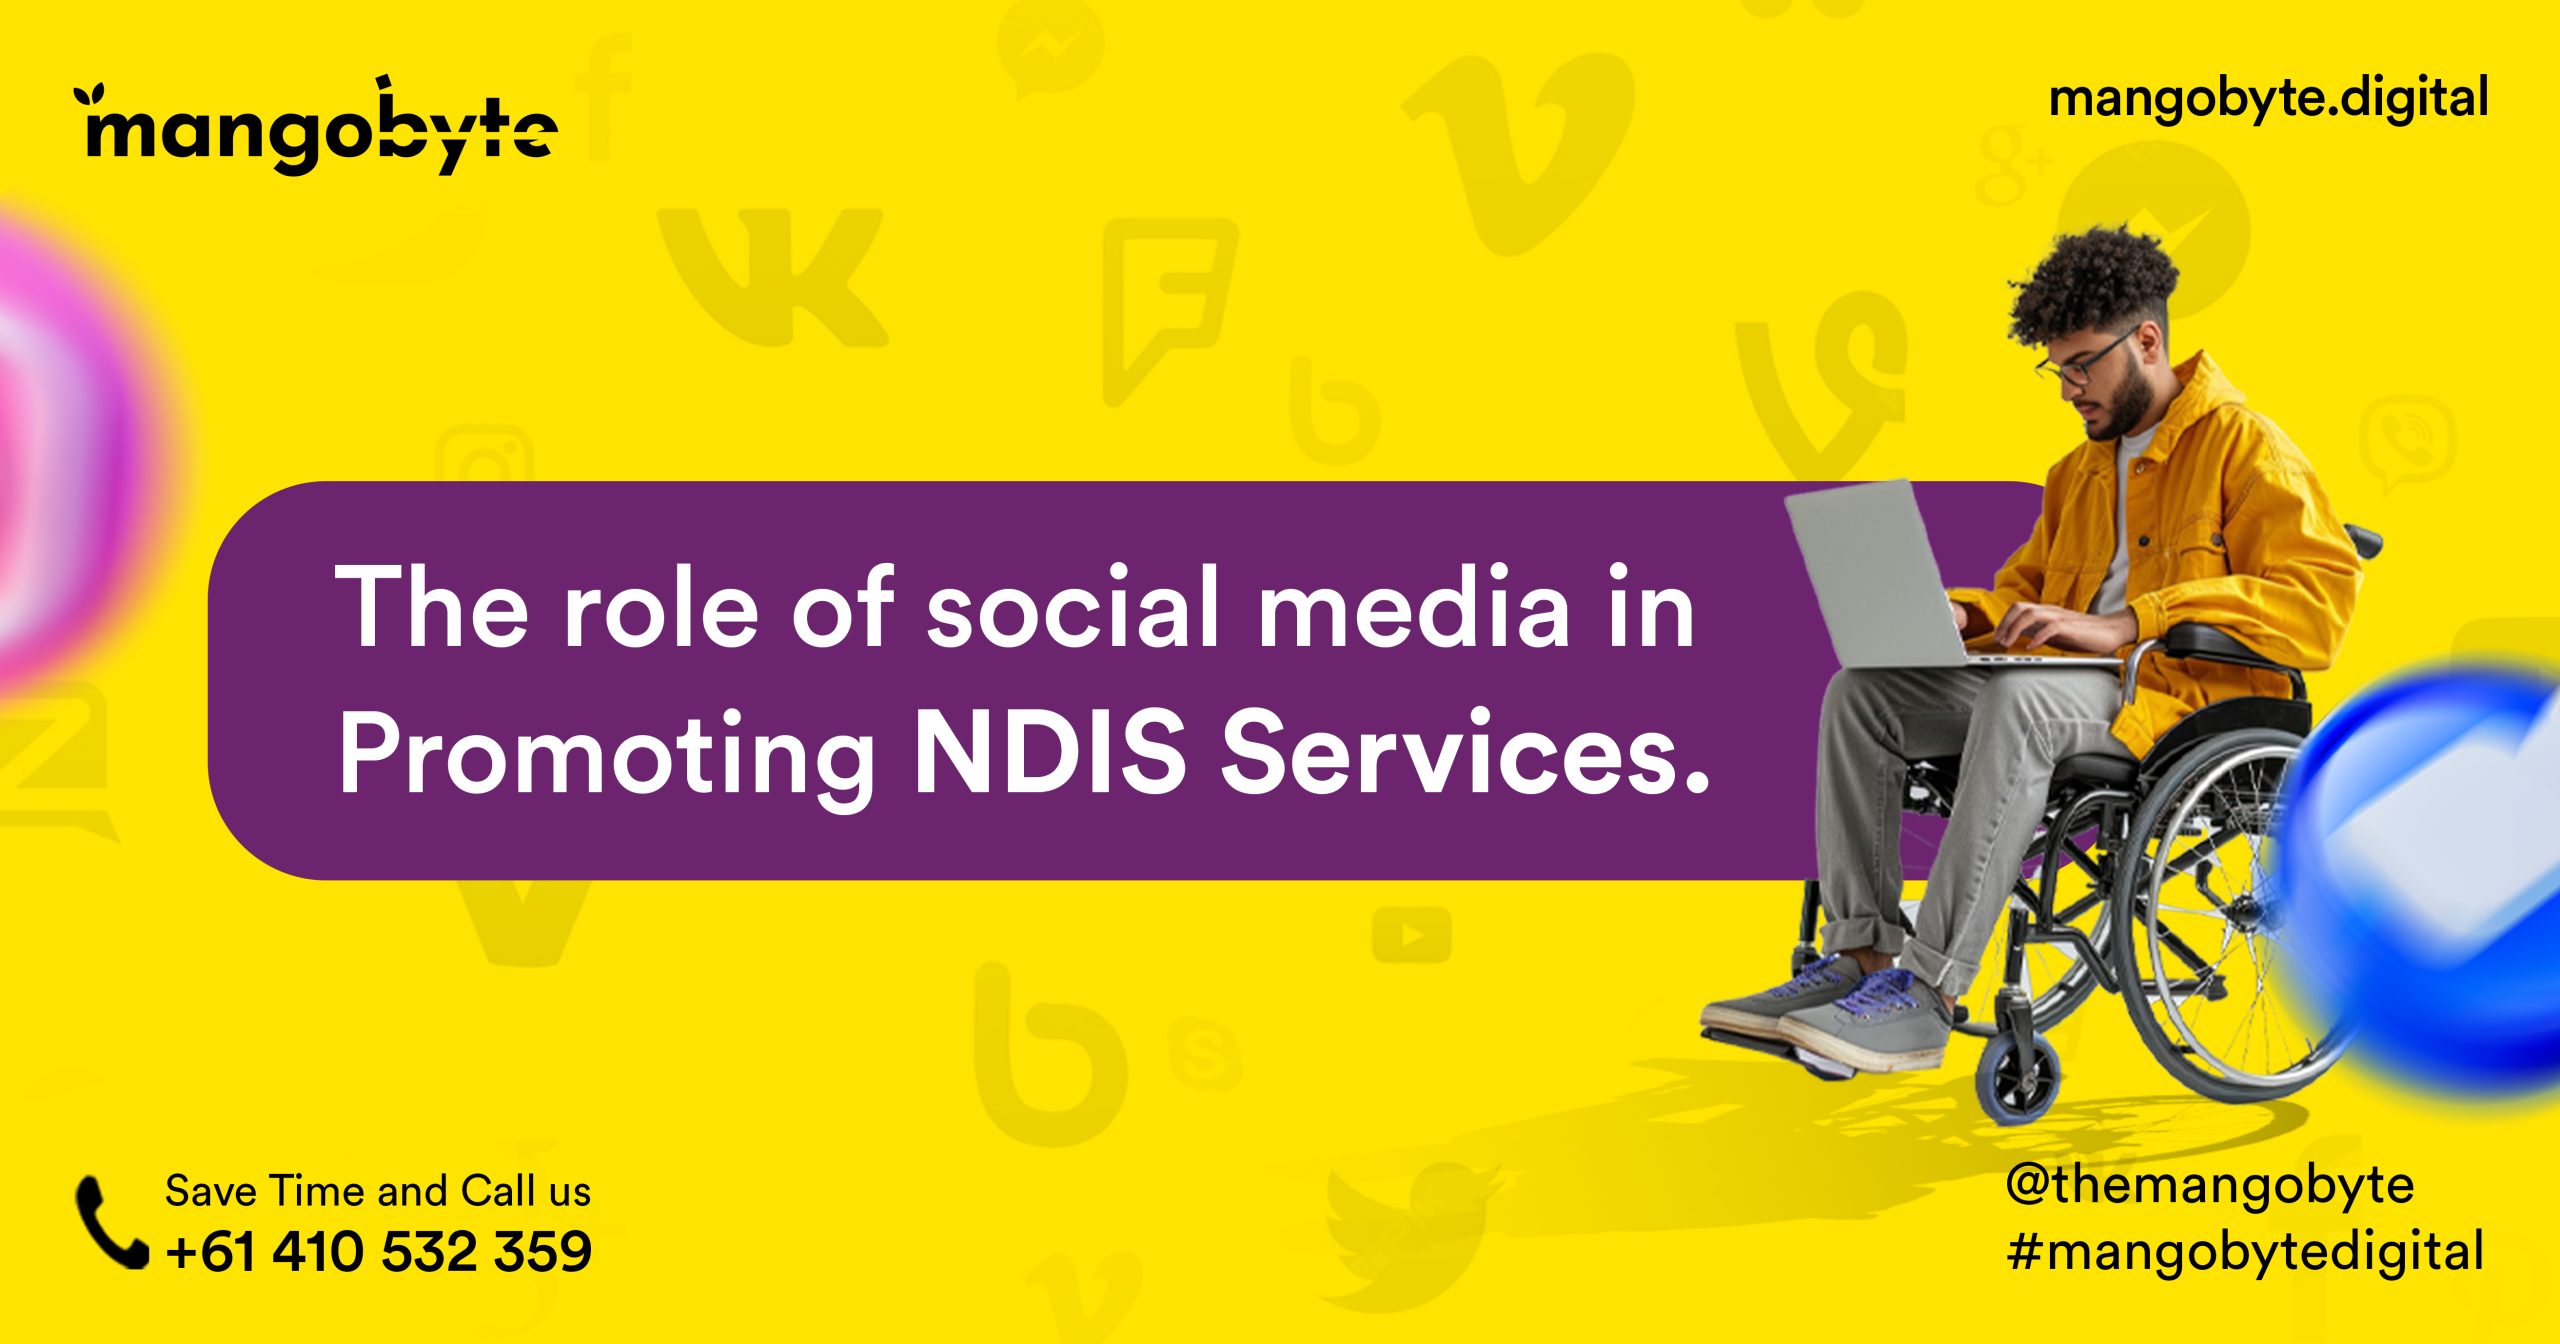 NDIS services